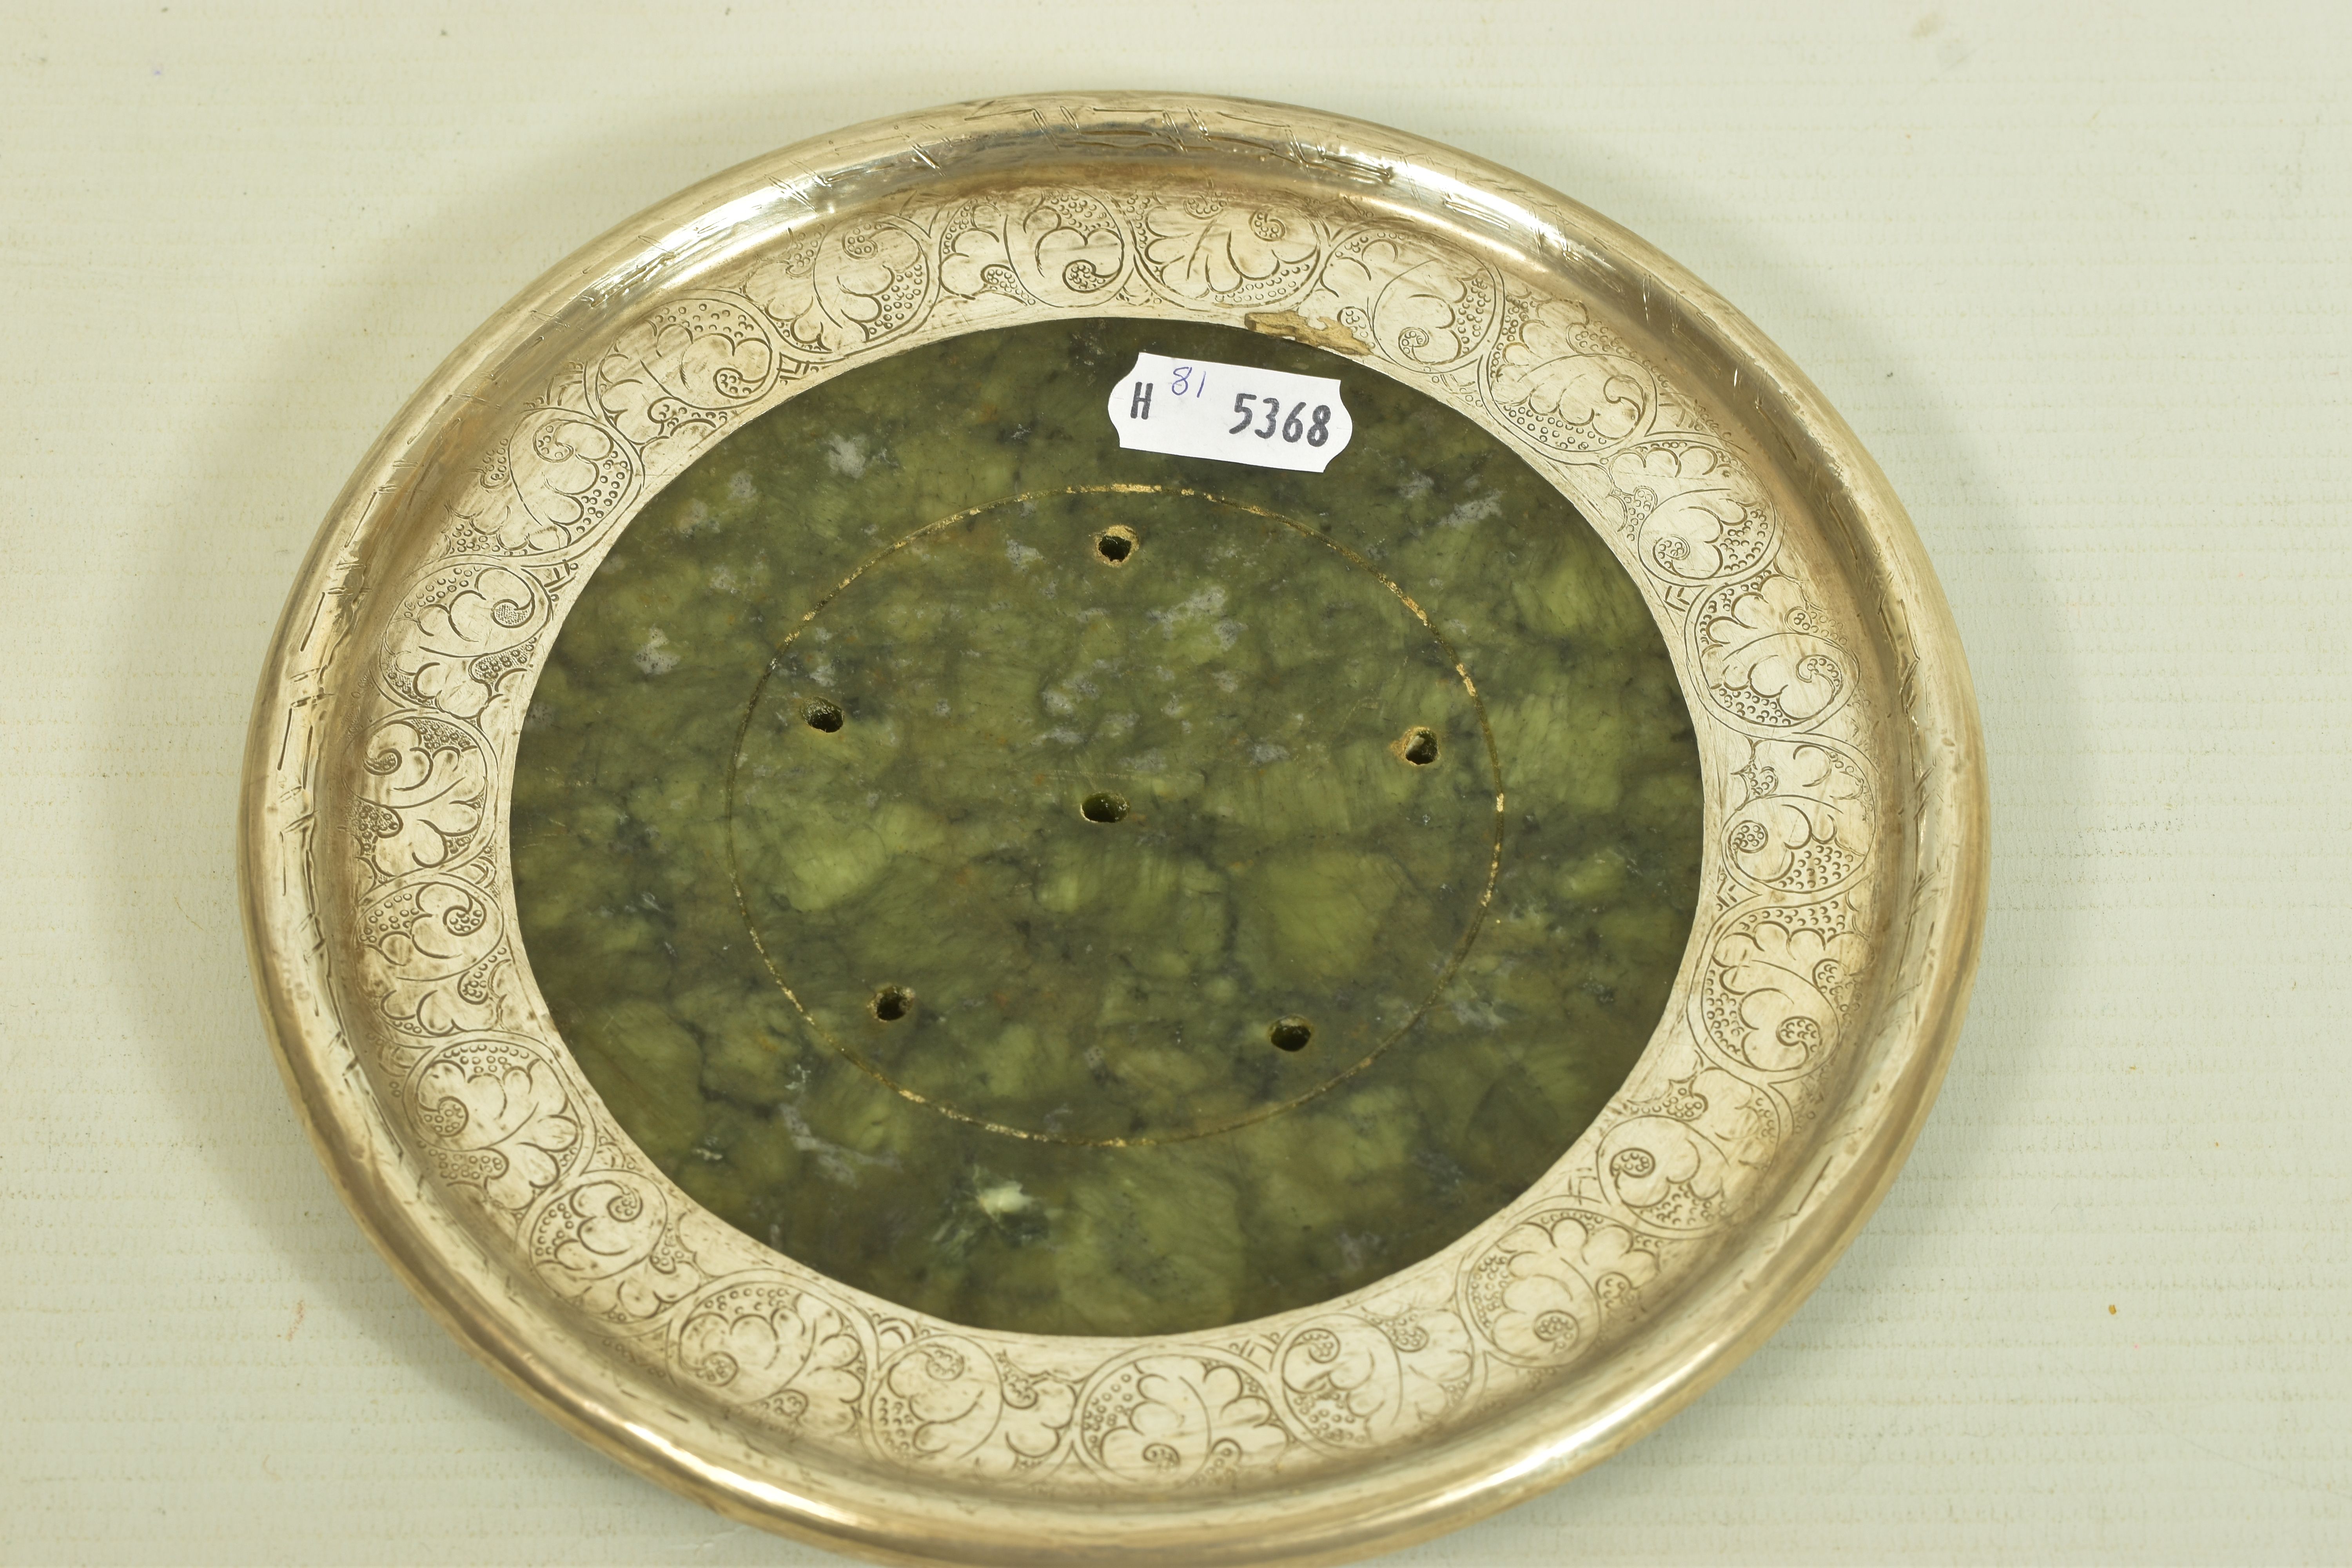 A WHITE METAL JADE BOWL AND STAND, believed to be 'Serpentine Jade,' with a white metal decorative - Image 5 of 6